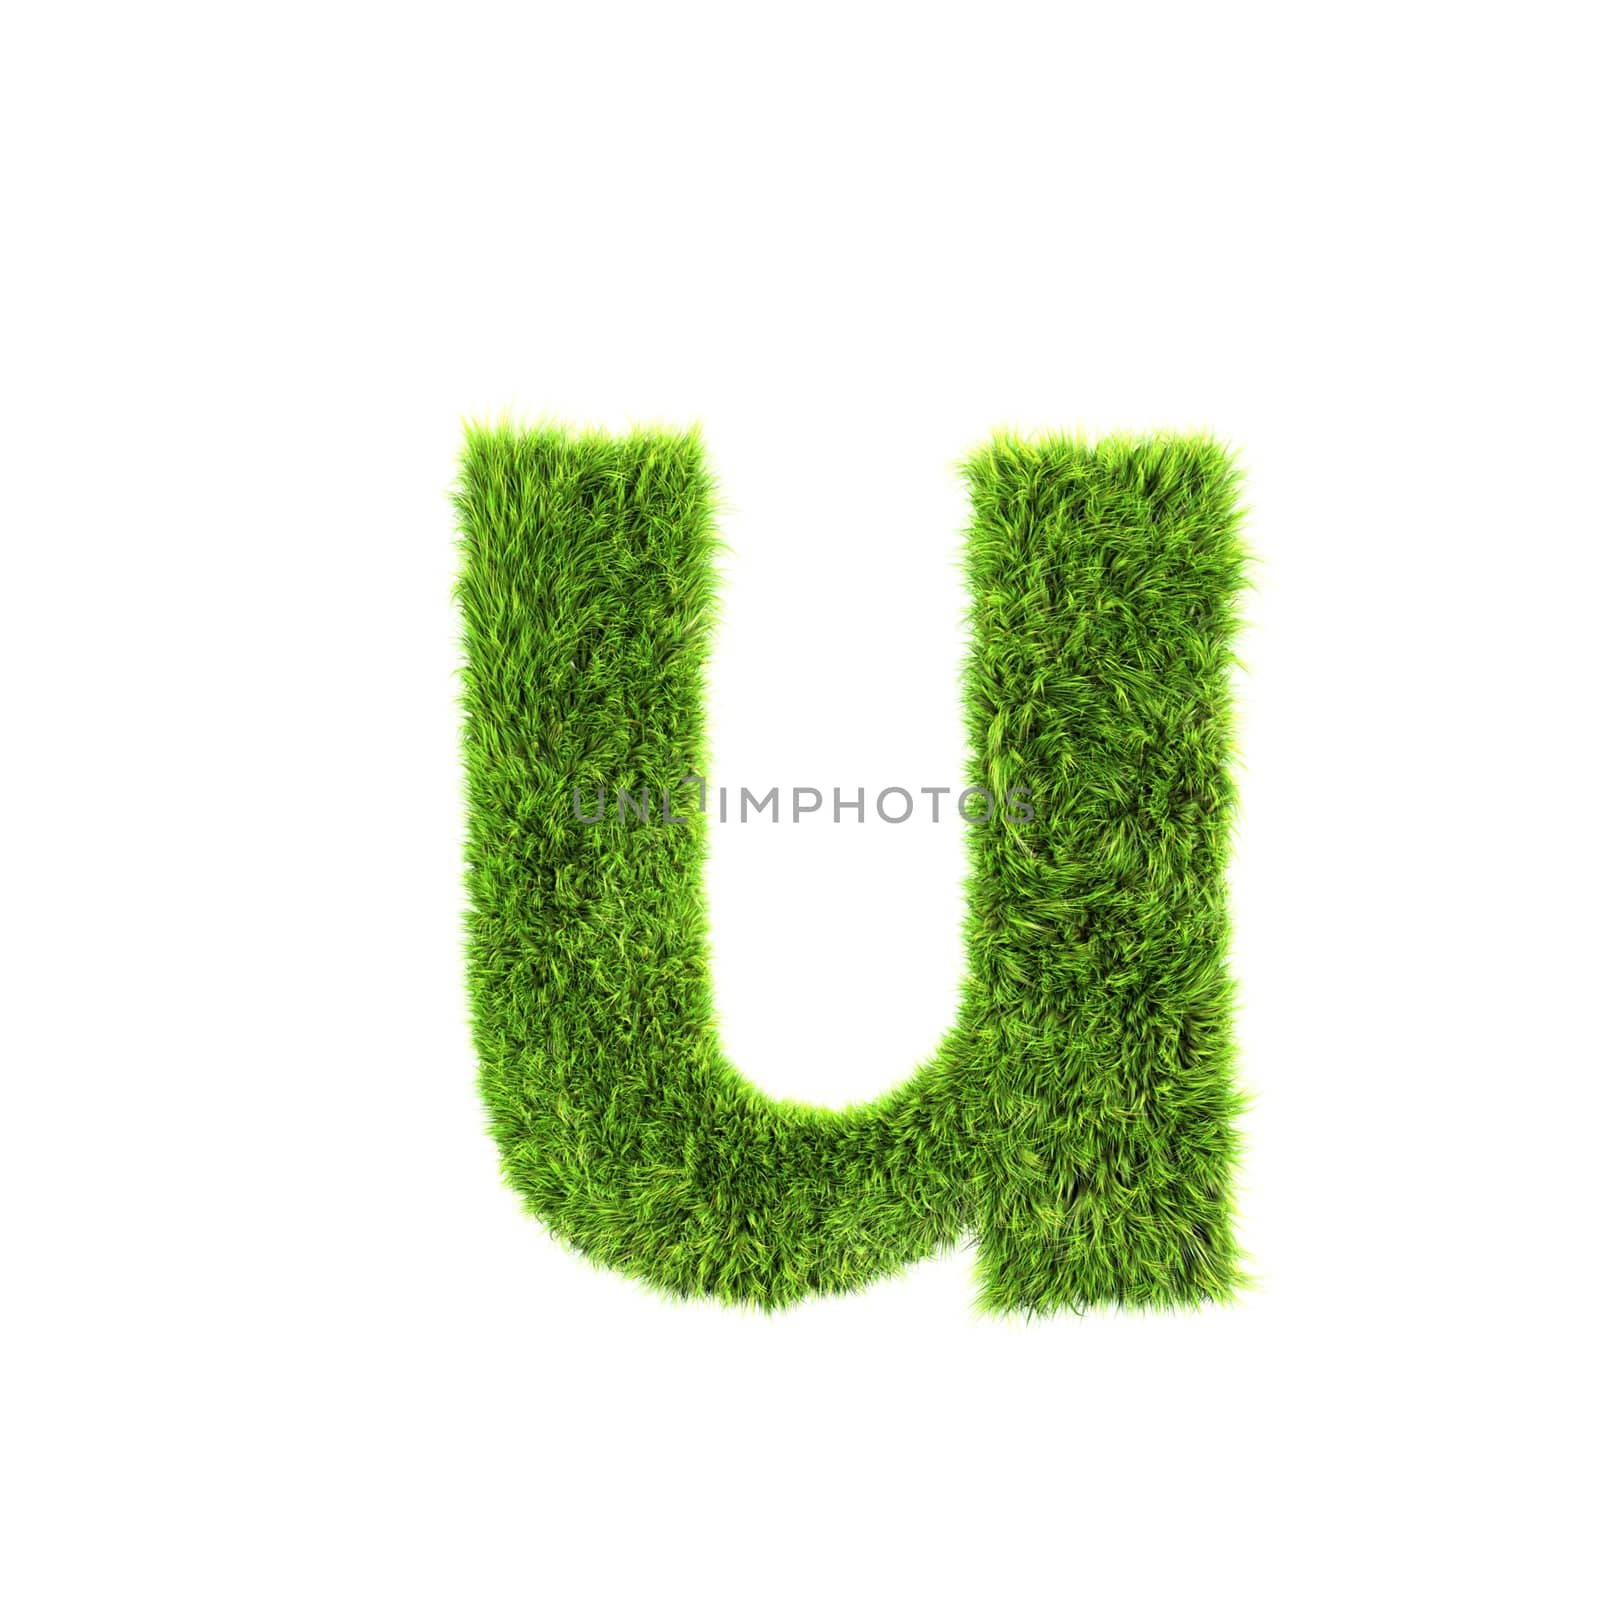 3d grass letter isolated on white background - u by chrisroll